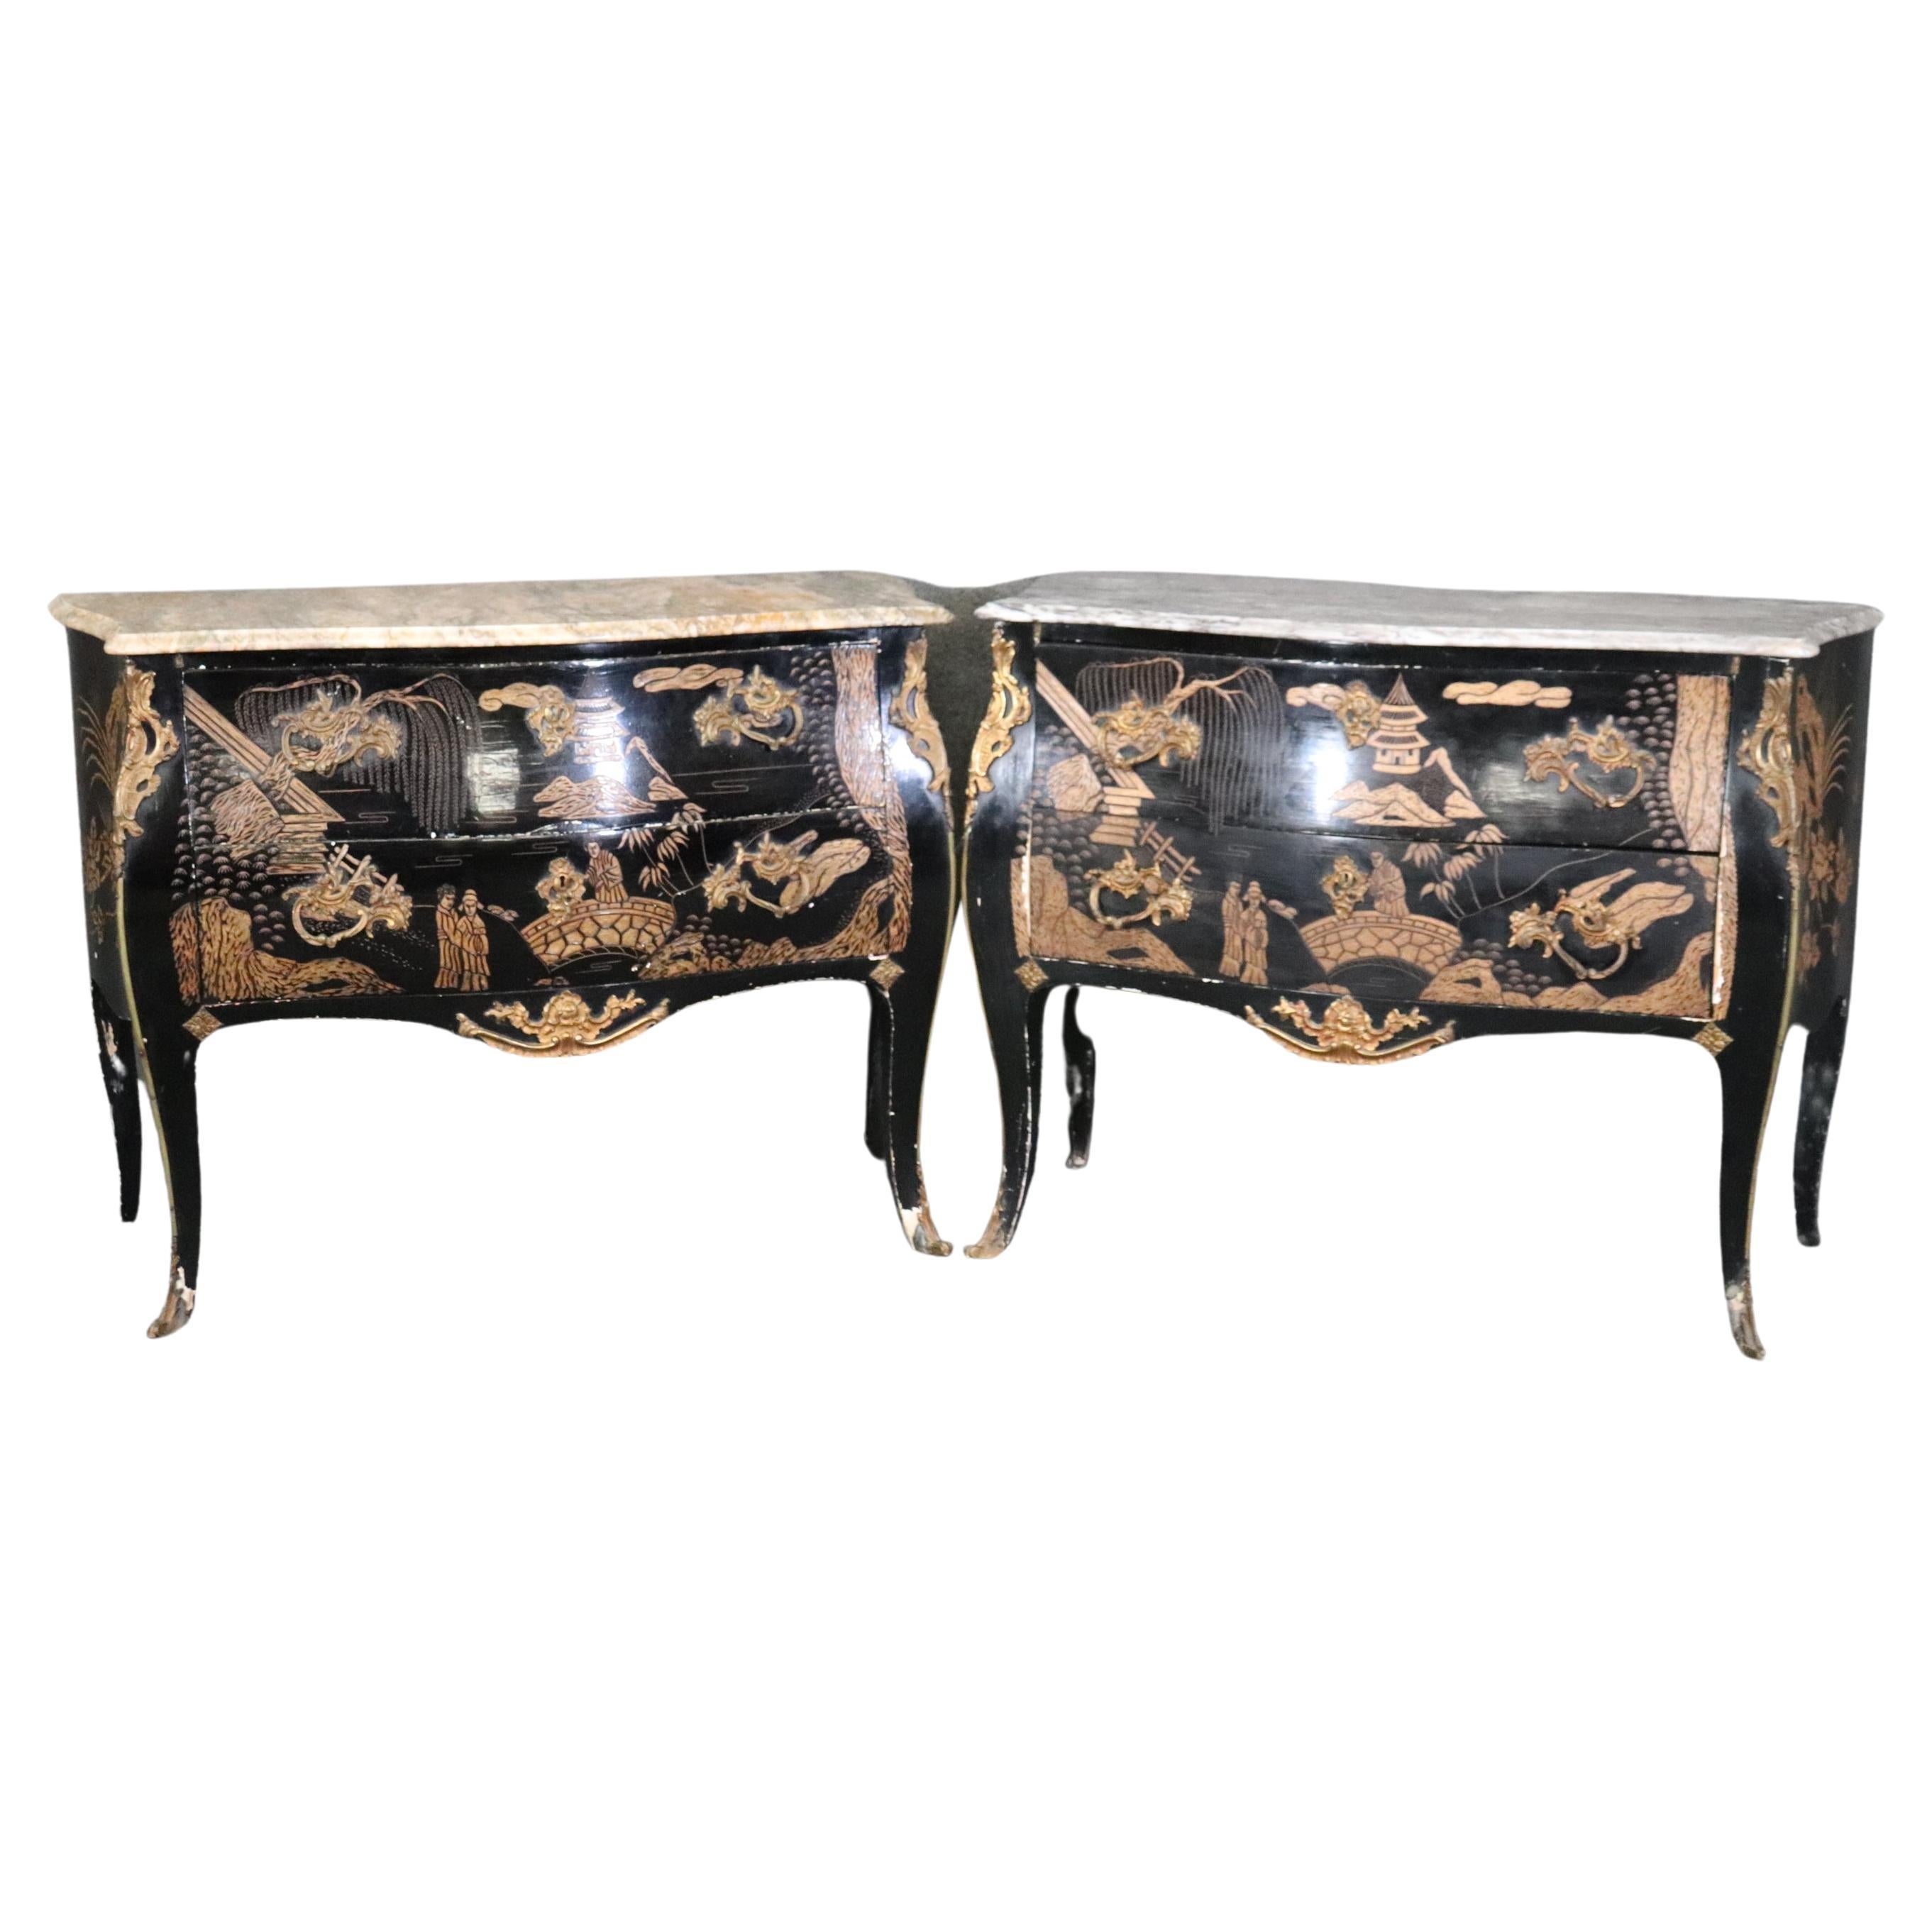 Rare Pair Coromandel Carved Lacquer Mable Top French Louis XV Style Commodes  For Sale